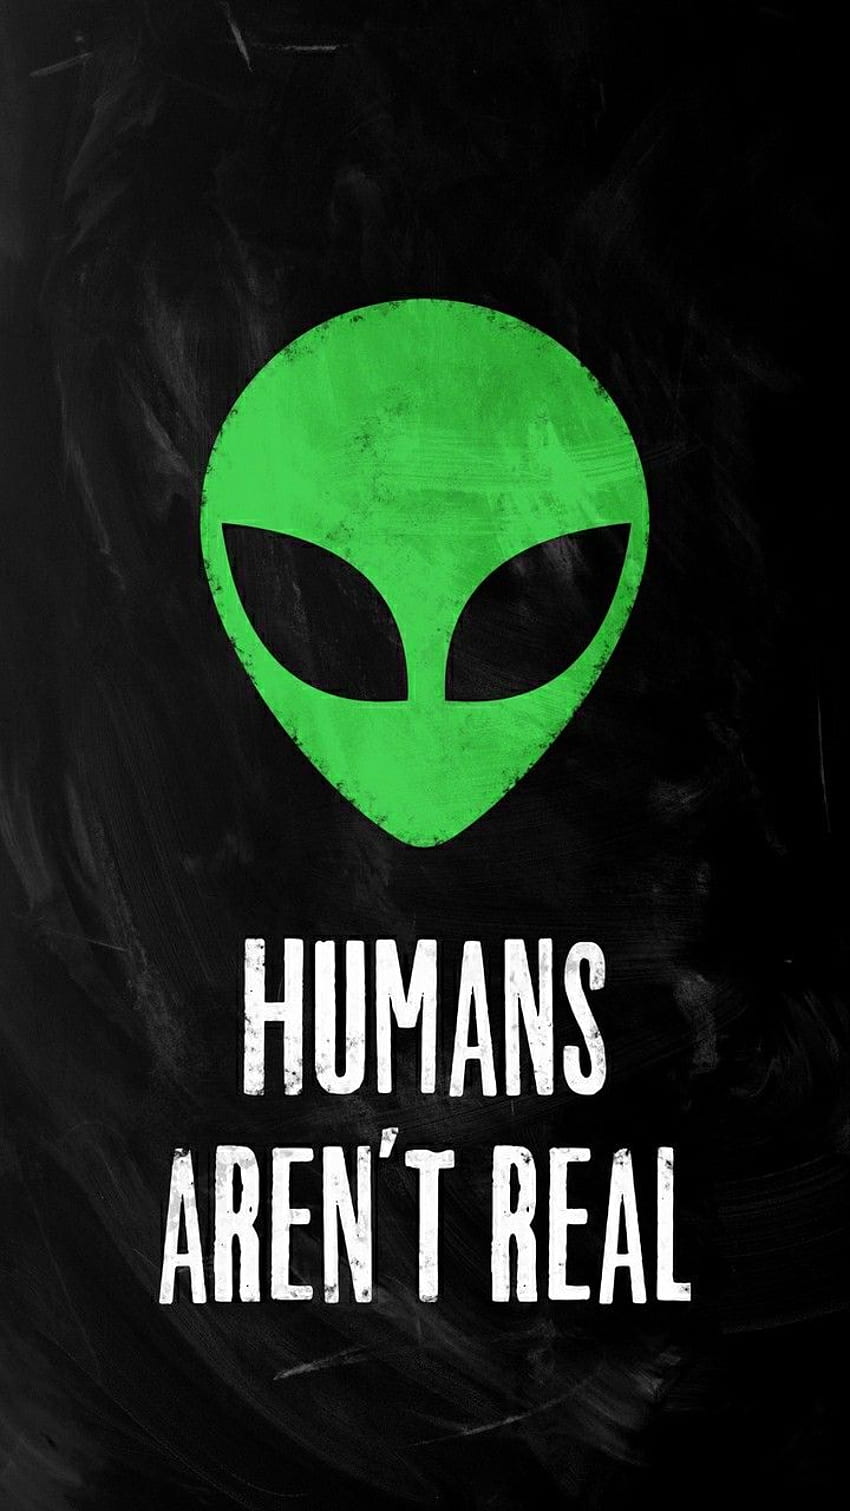 Becca on Quotes °Text. Alien iphone , Emoji iphone, Abstract iphone, Alien Smoking HD phone wallpaper